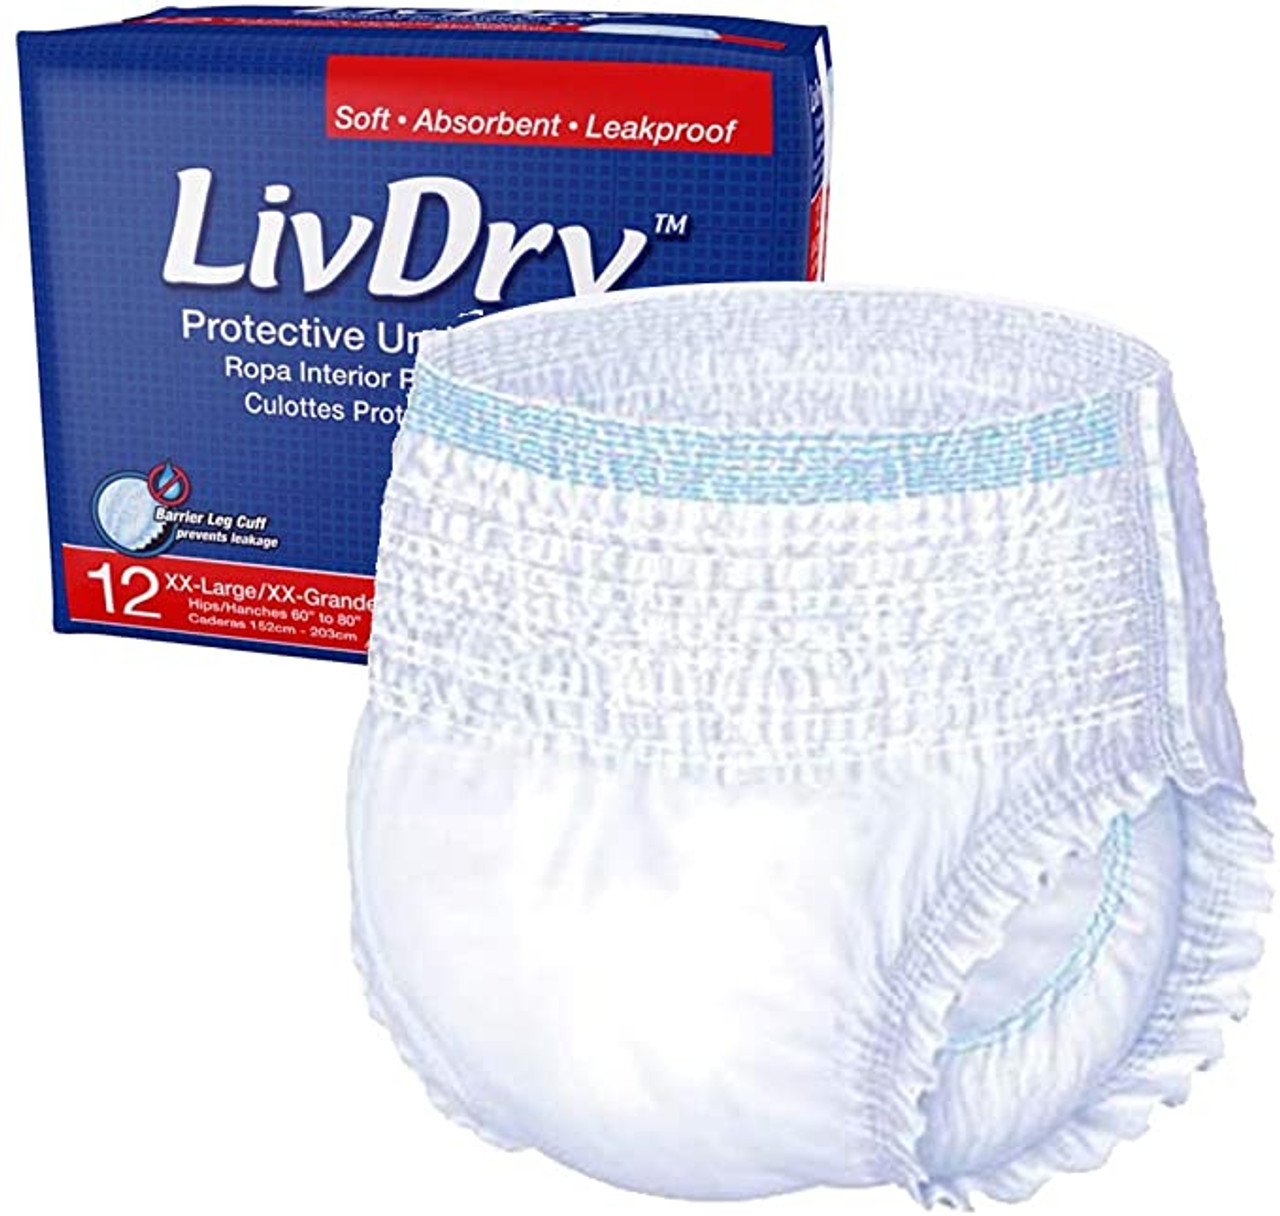 Pristine Life, Incontinence Protective Underwear, Absorbs Light Urine  Leaks, Wash & Reuse, Anti Bacterial, Hygienic & Leakproof, Comfy Cotton, Pack Of 1, White